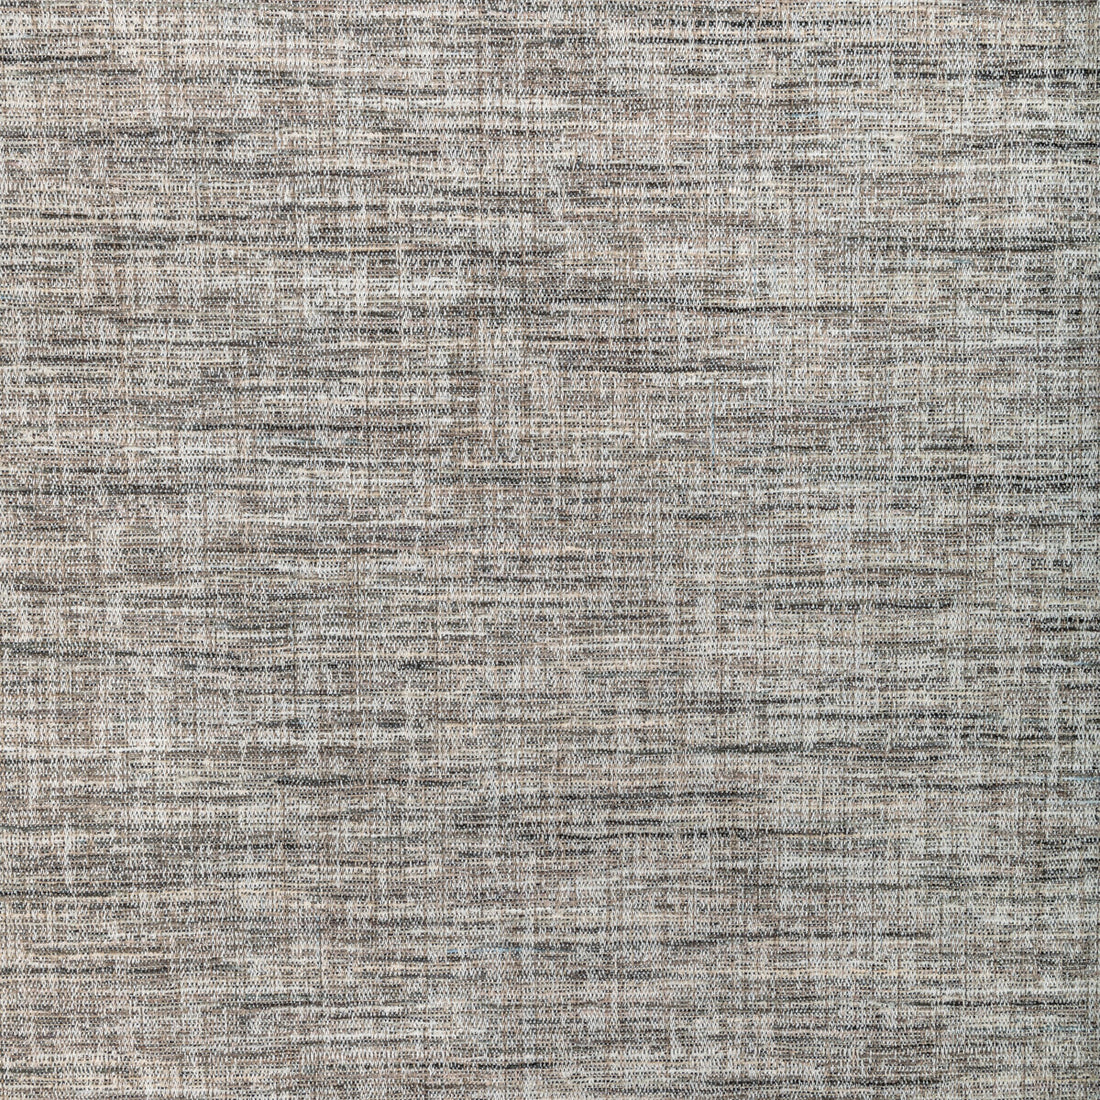 Bluff Trail fabric in smoke color - pattern 36382.106.0 - by Kravet Smart in the Jeffrey Alan Marks Seascapes collection